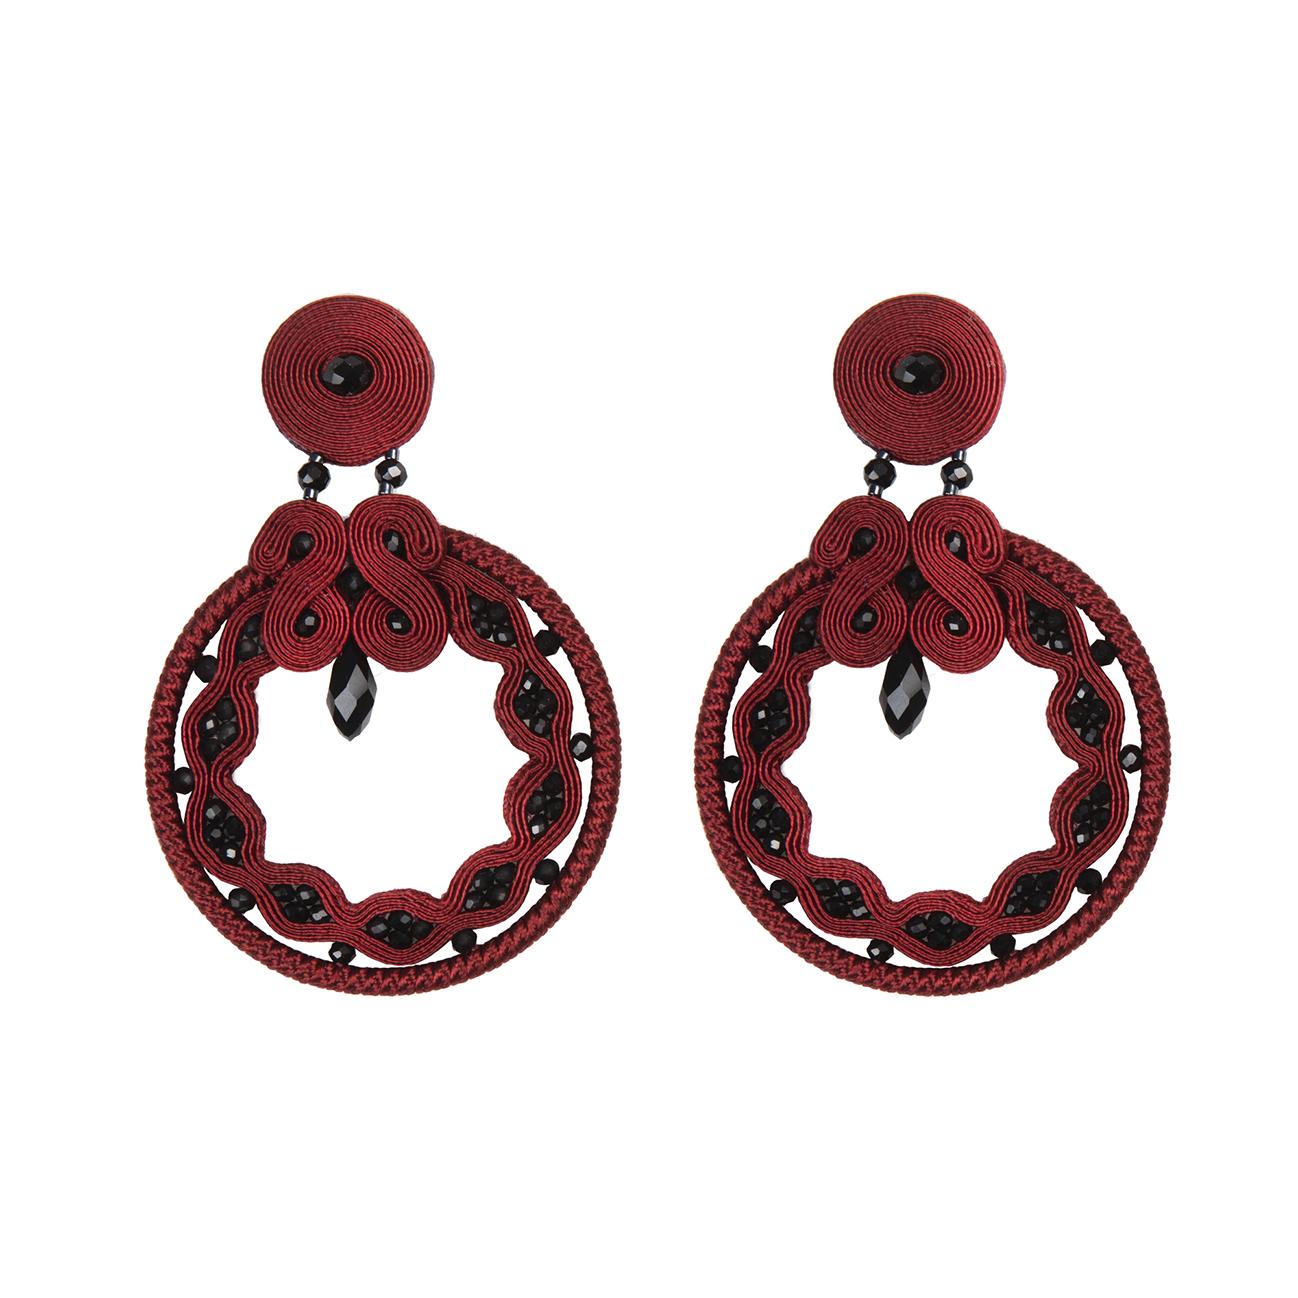  Miabril Coral & Jet Soutache Earrings with Silk Rayon, Beads & Silver Closure For Sale 10